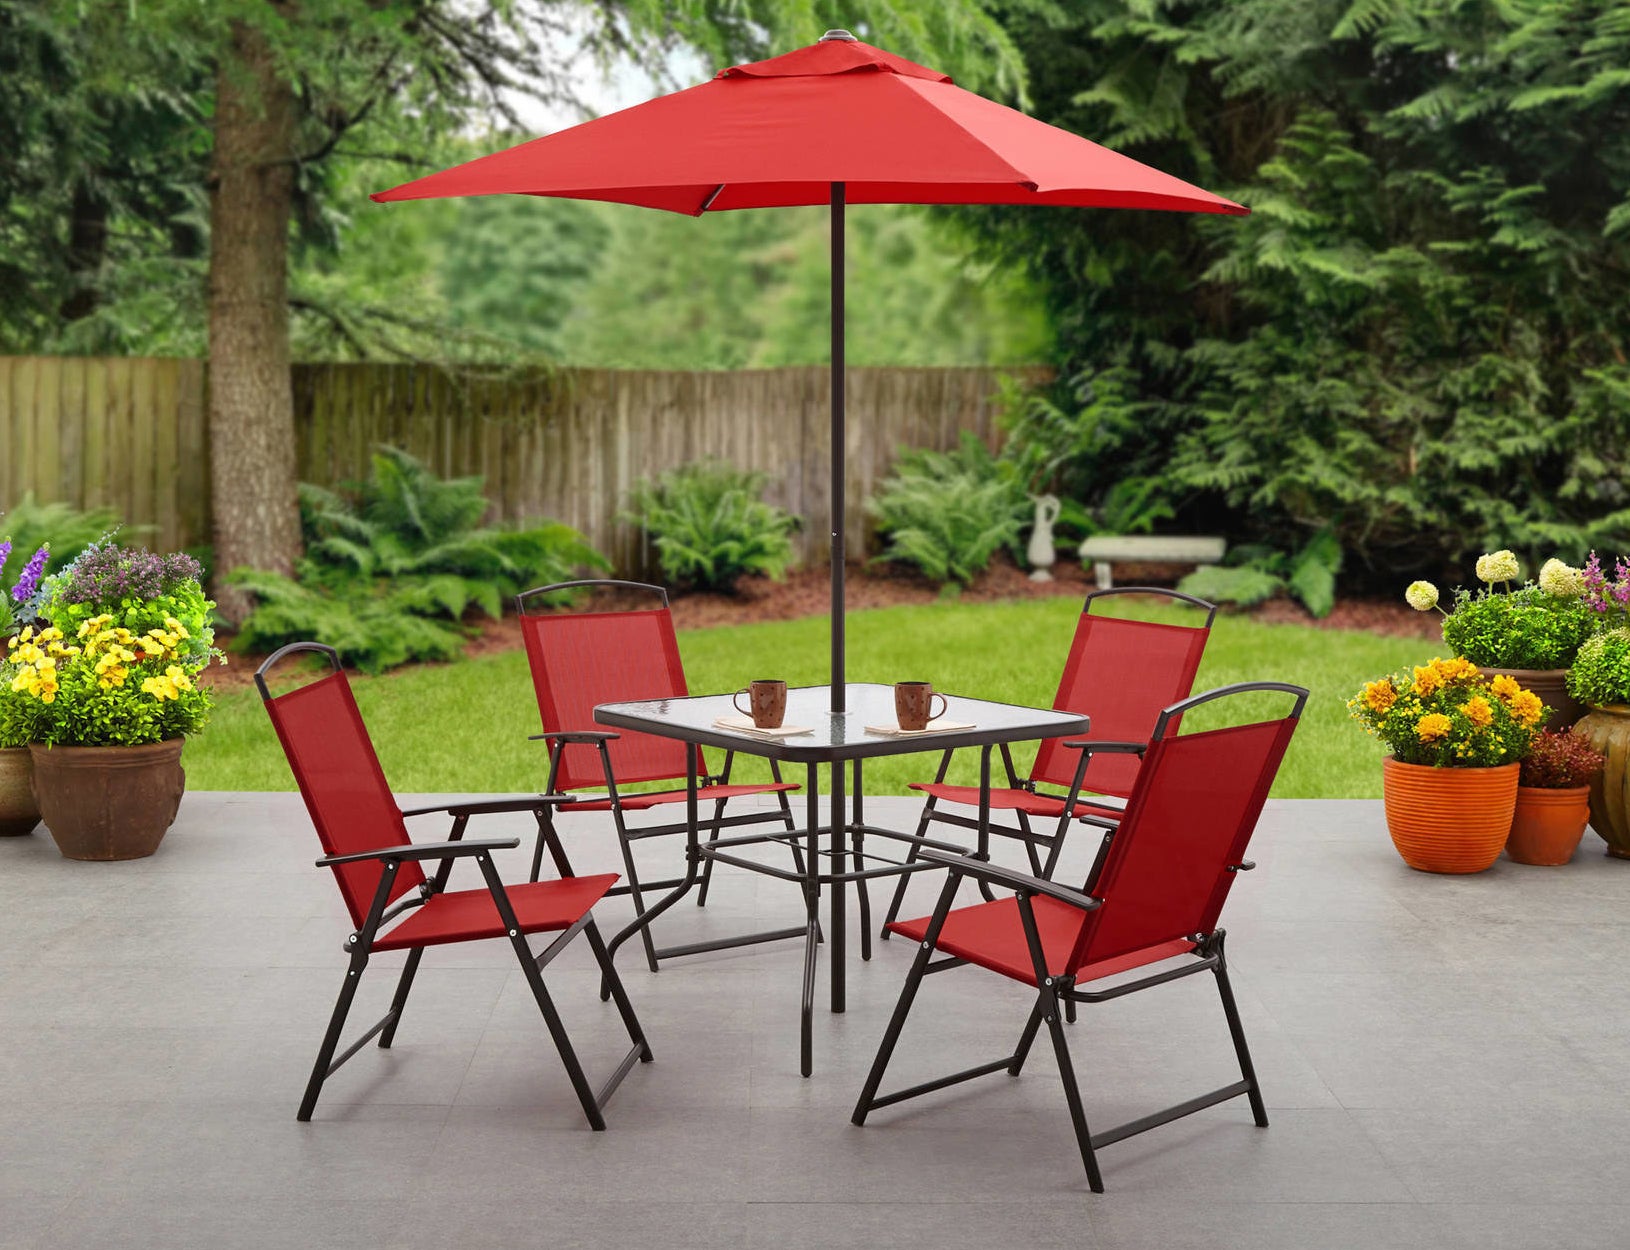 The patio set in red